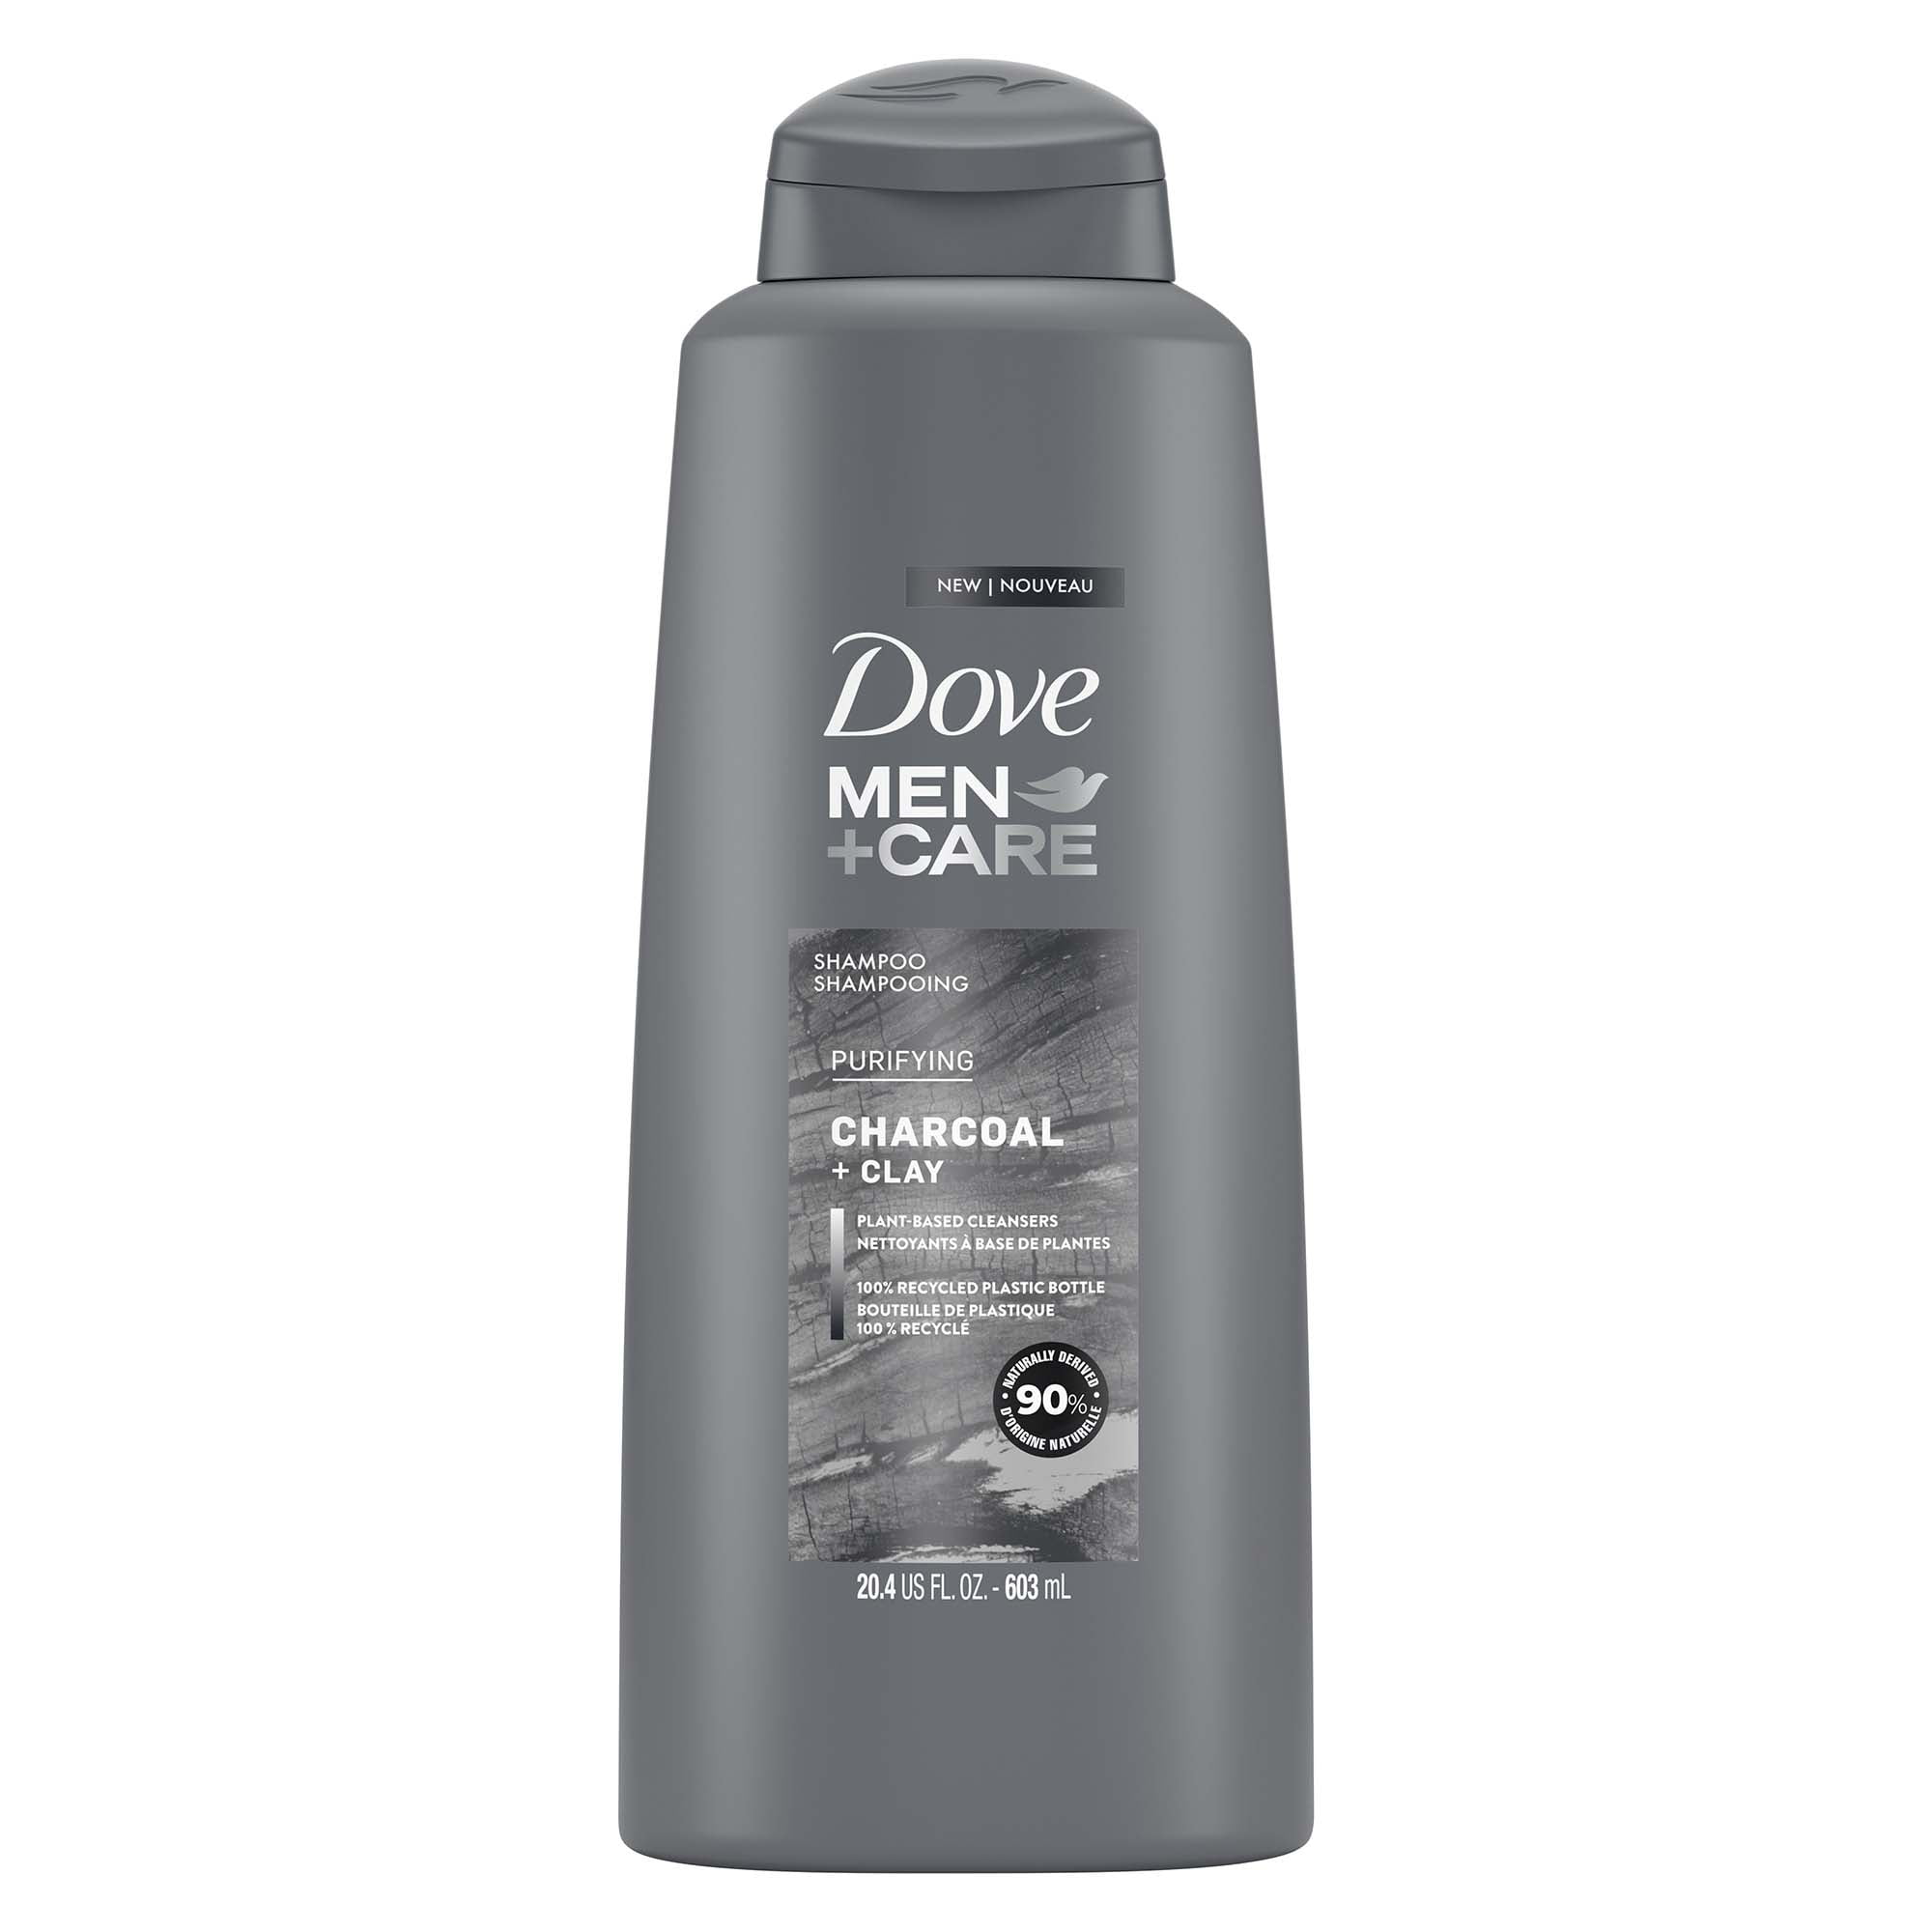 Dove Men+Care Charcoal Thickening Daily Shampoo, 20.4 fl oz